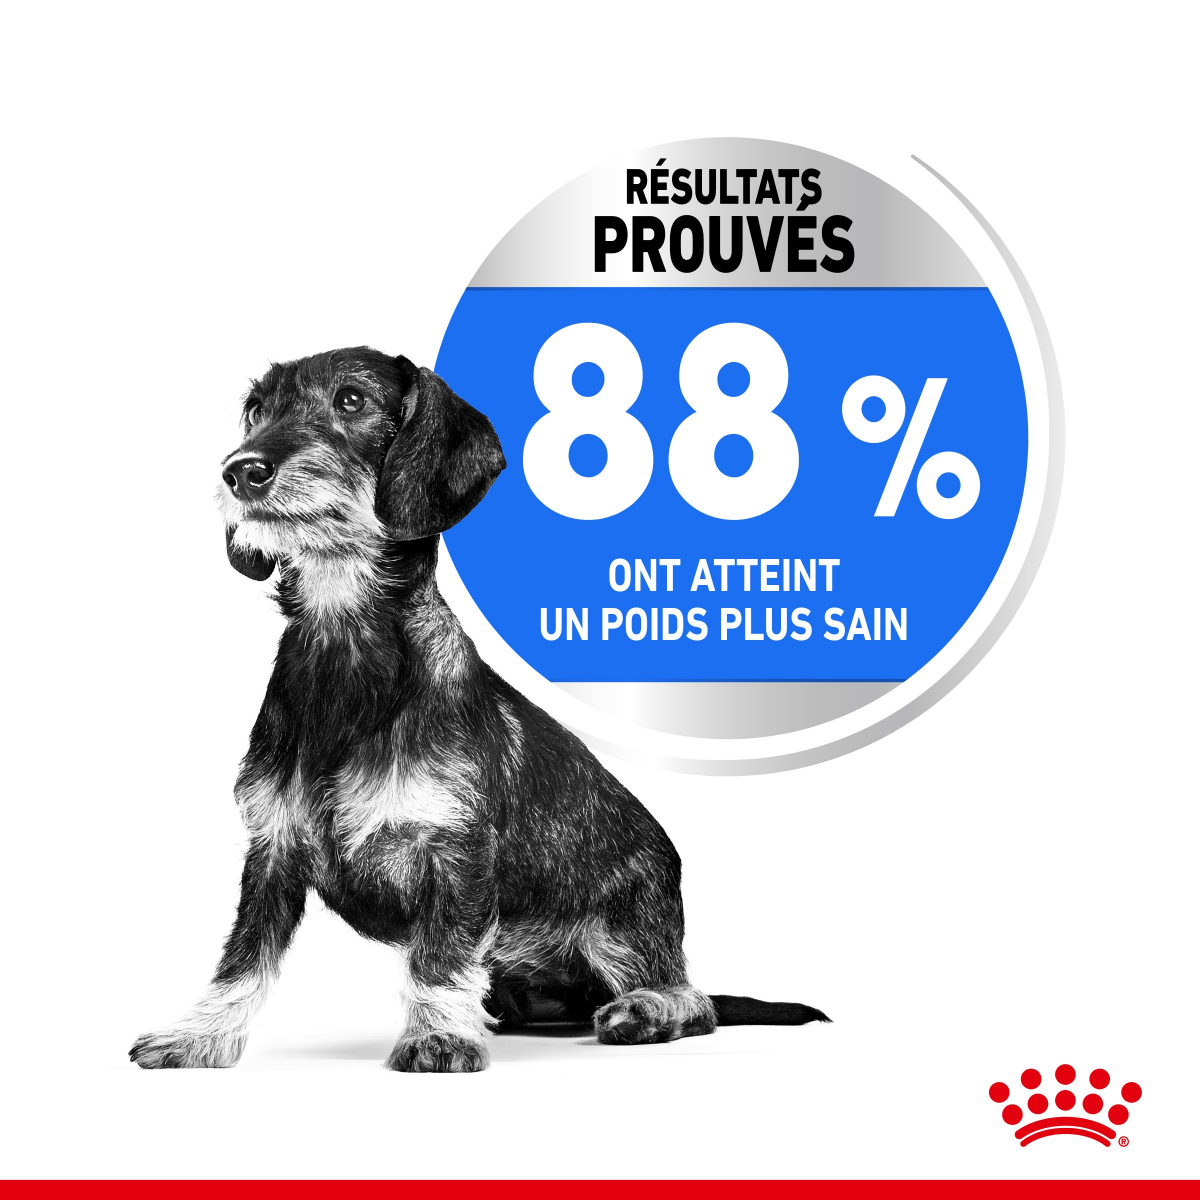 Royal Canin Mini Light Weight Care petit chien en embonpoint